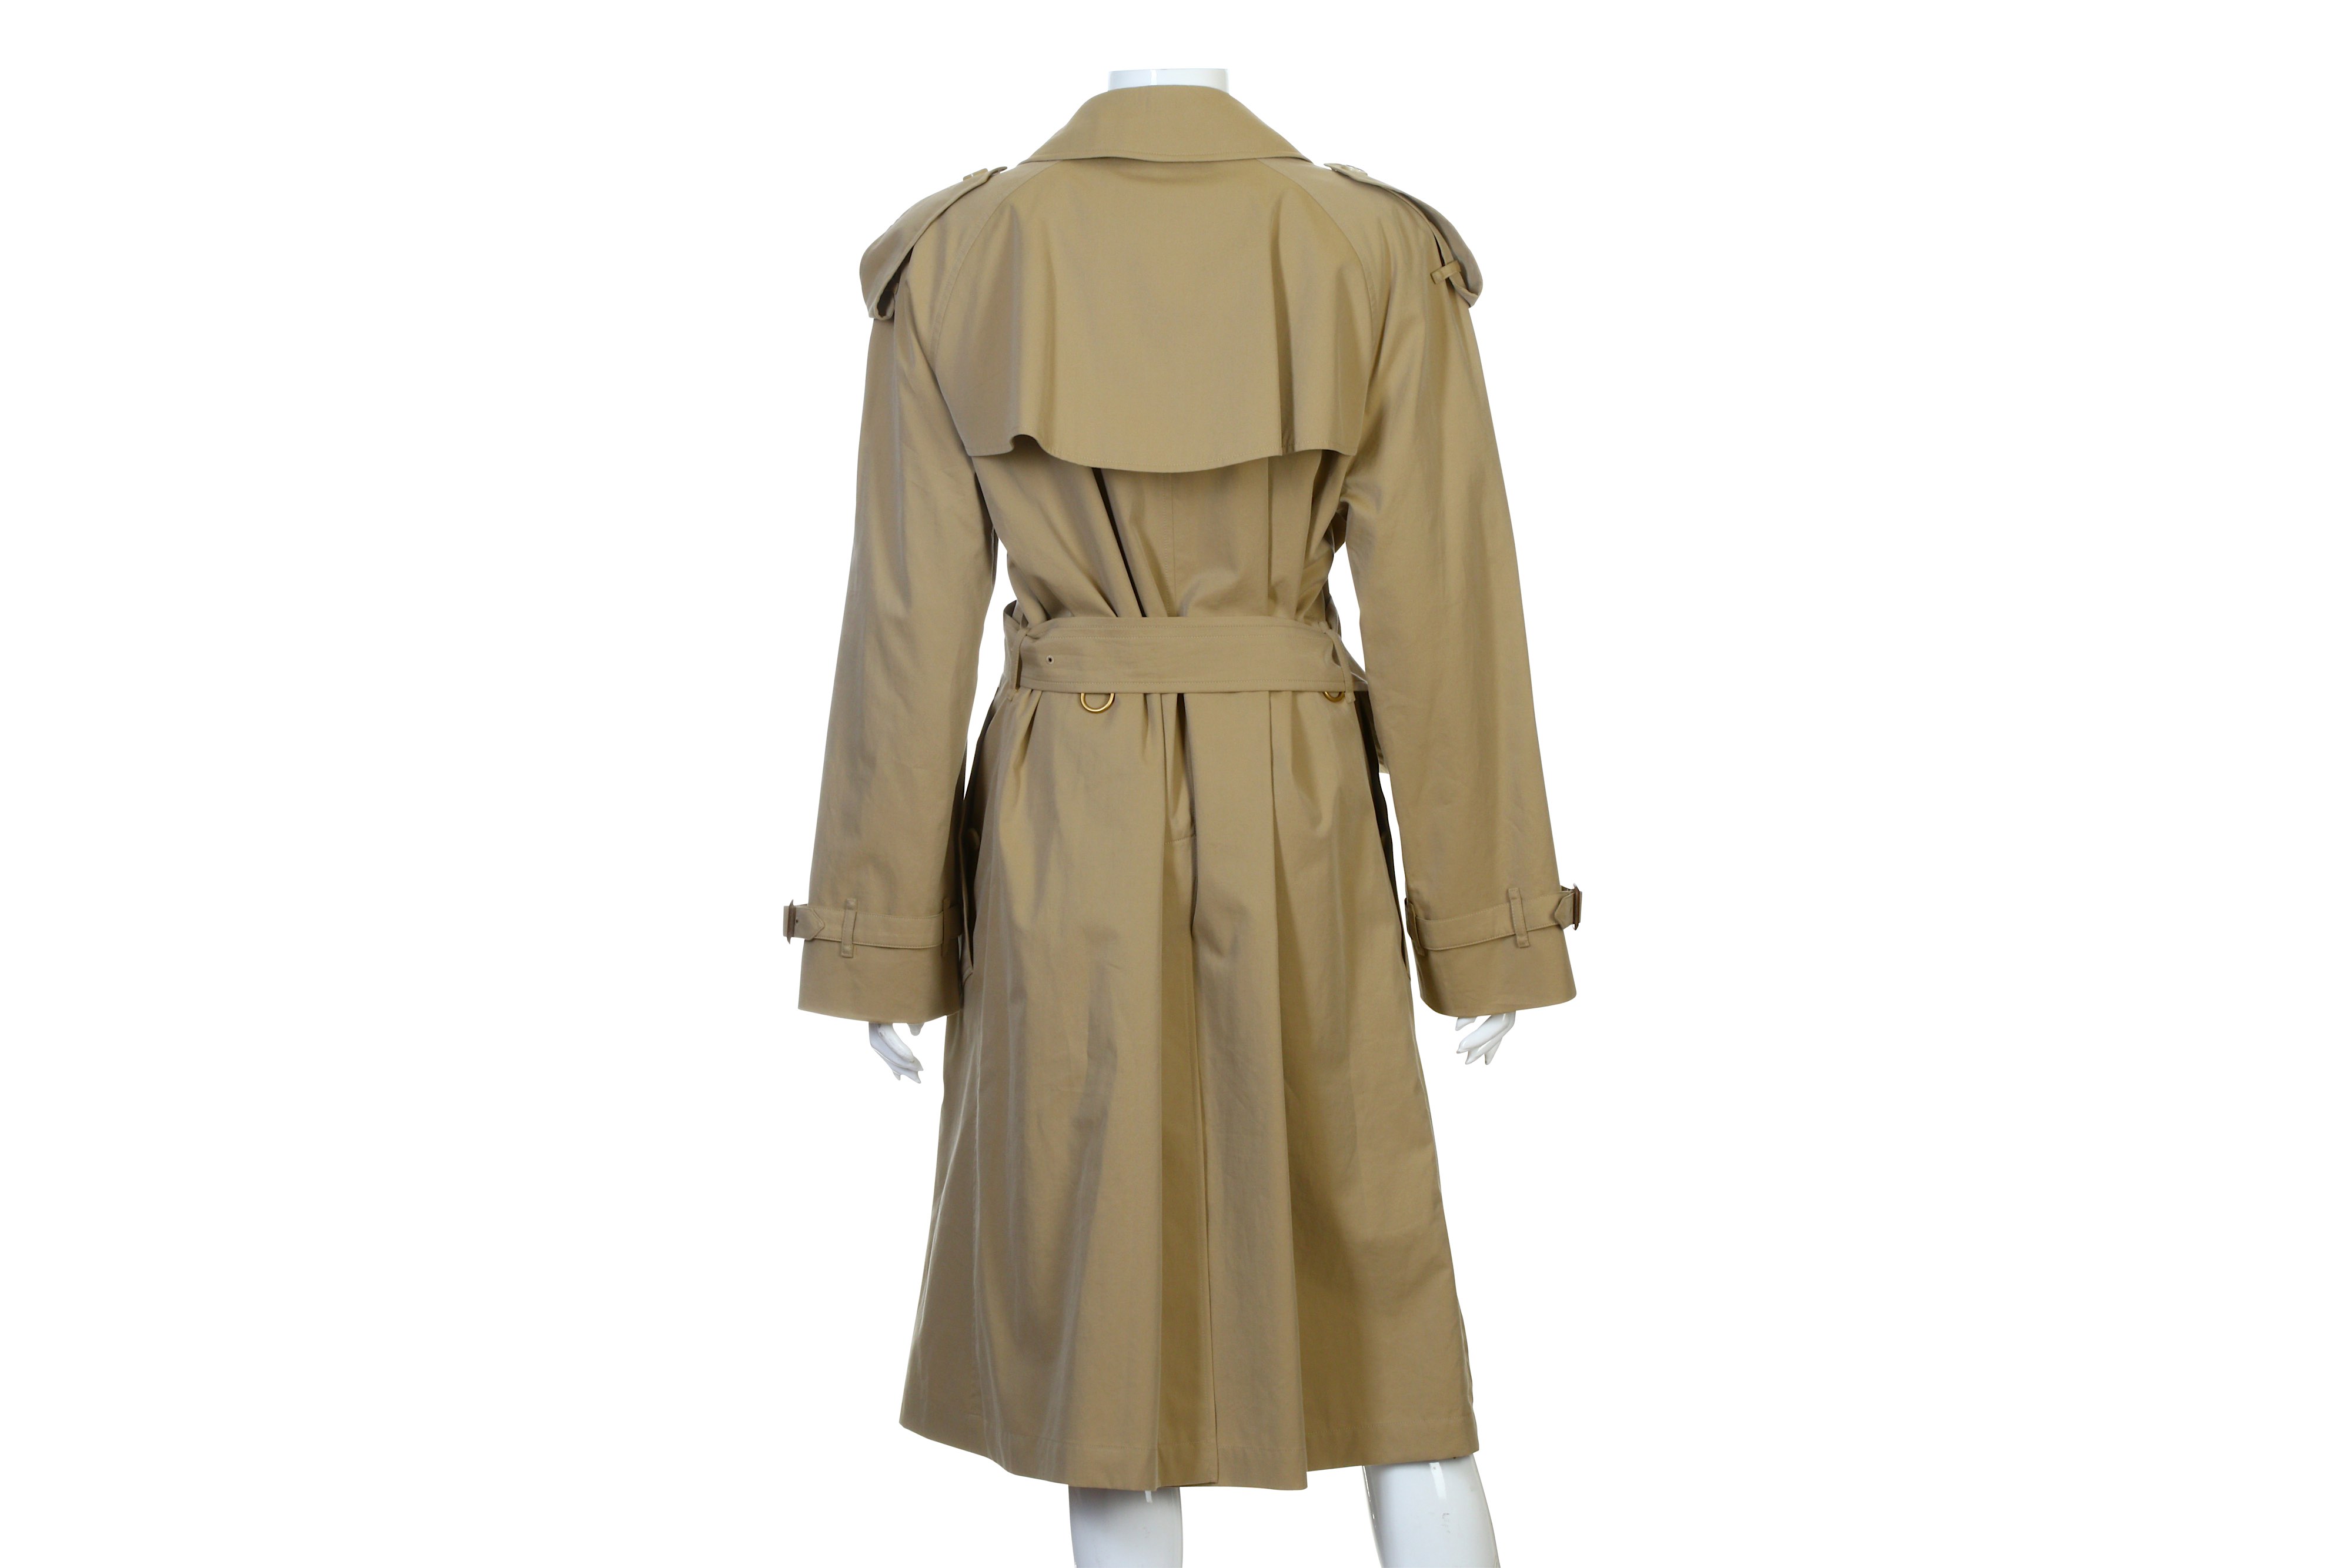 Burberry The Westminster Heritage Trench Coat - Image 4 of 5